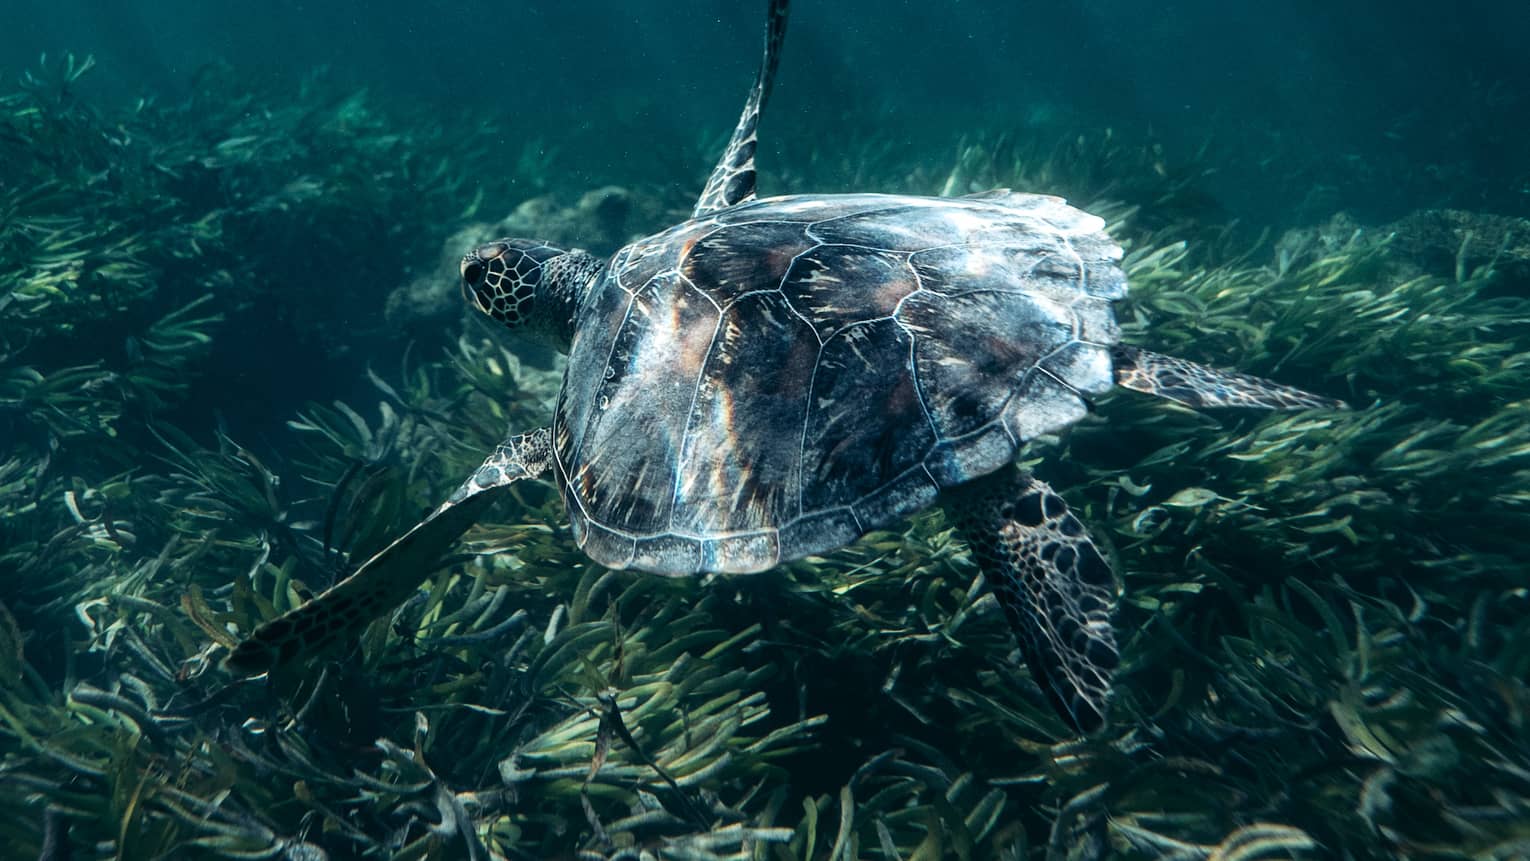 Beams of refracted sunlight illuminate a sea turtle's shell as it glides over a gently swaying kelp forest. 